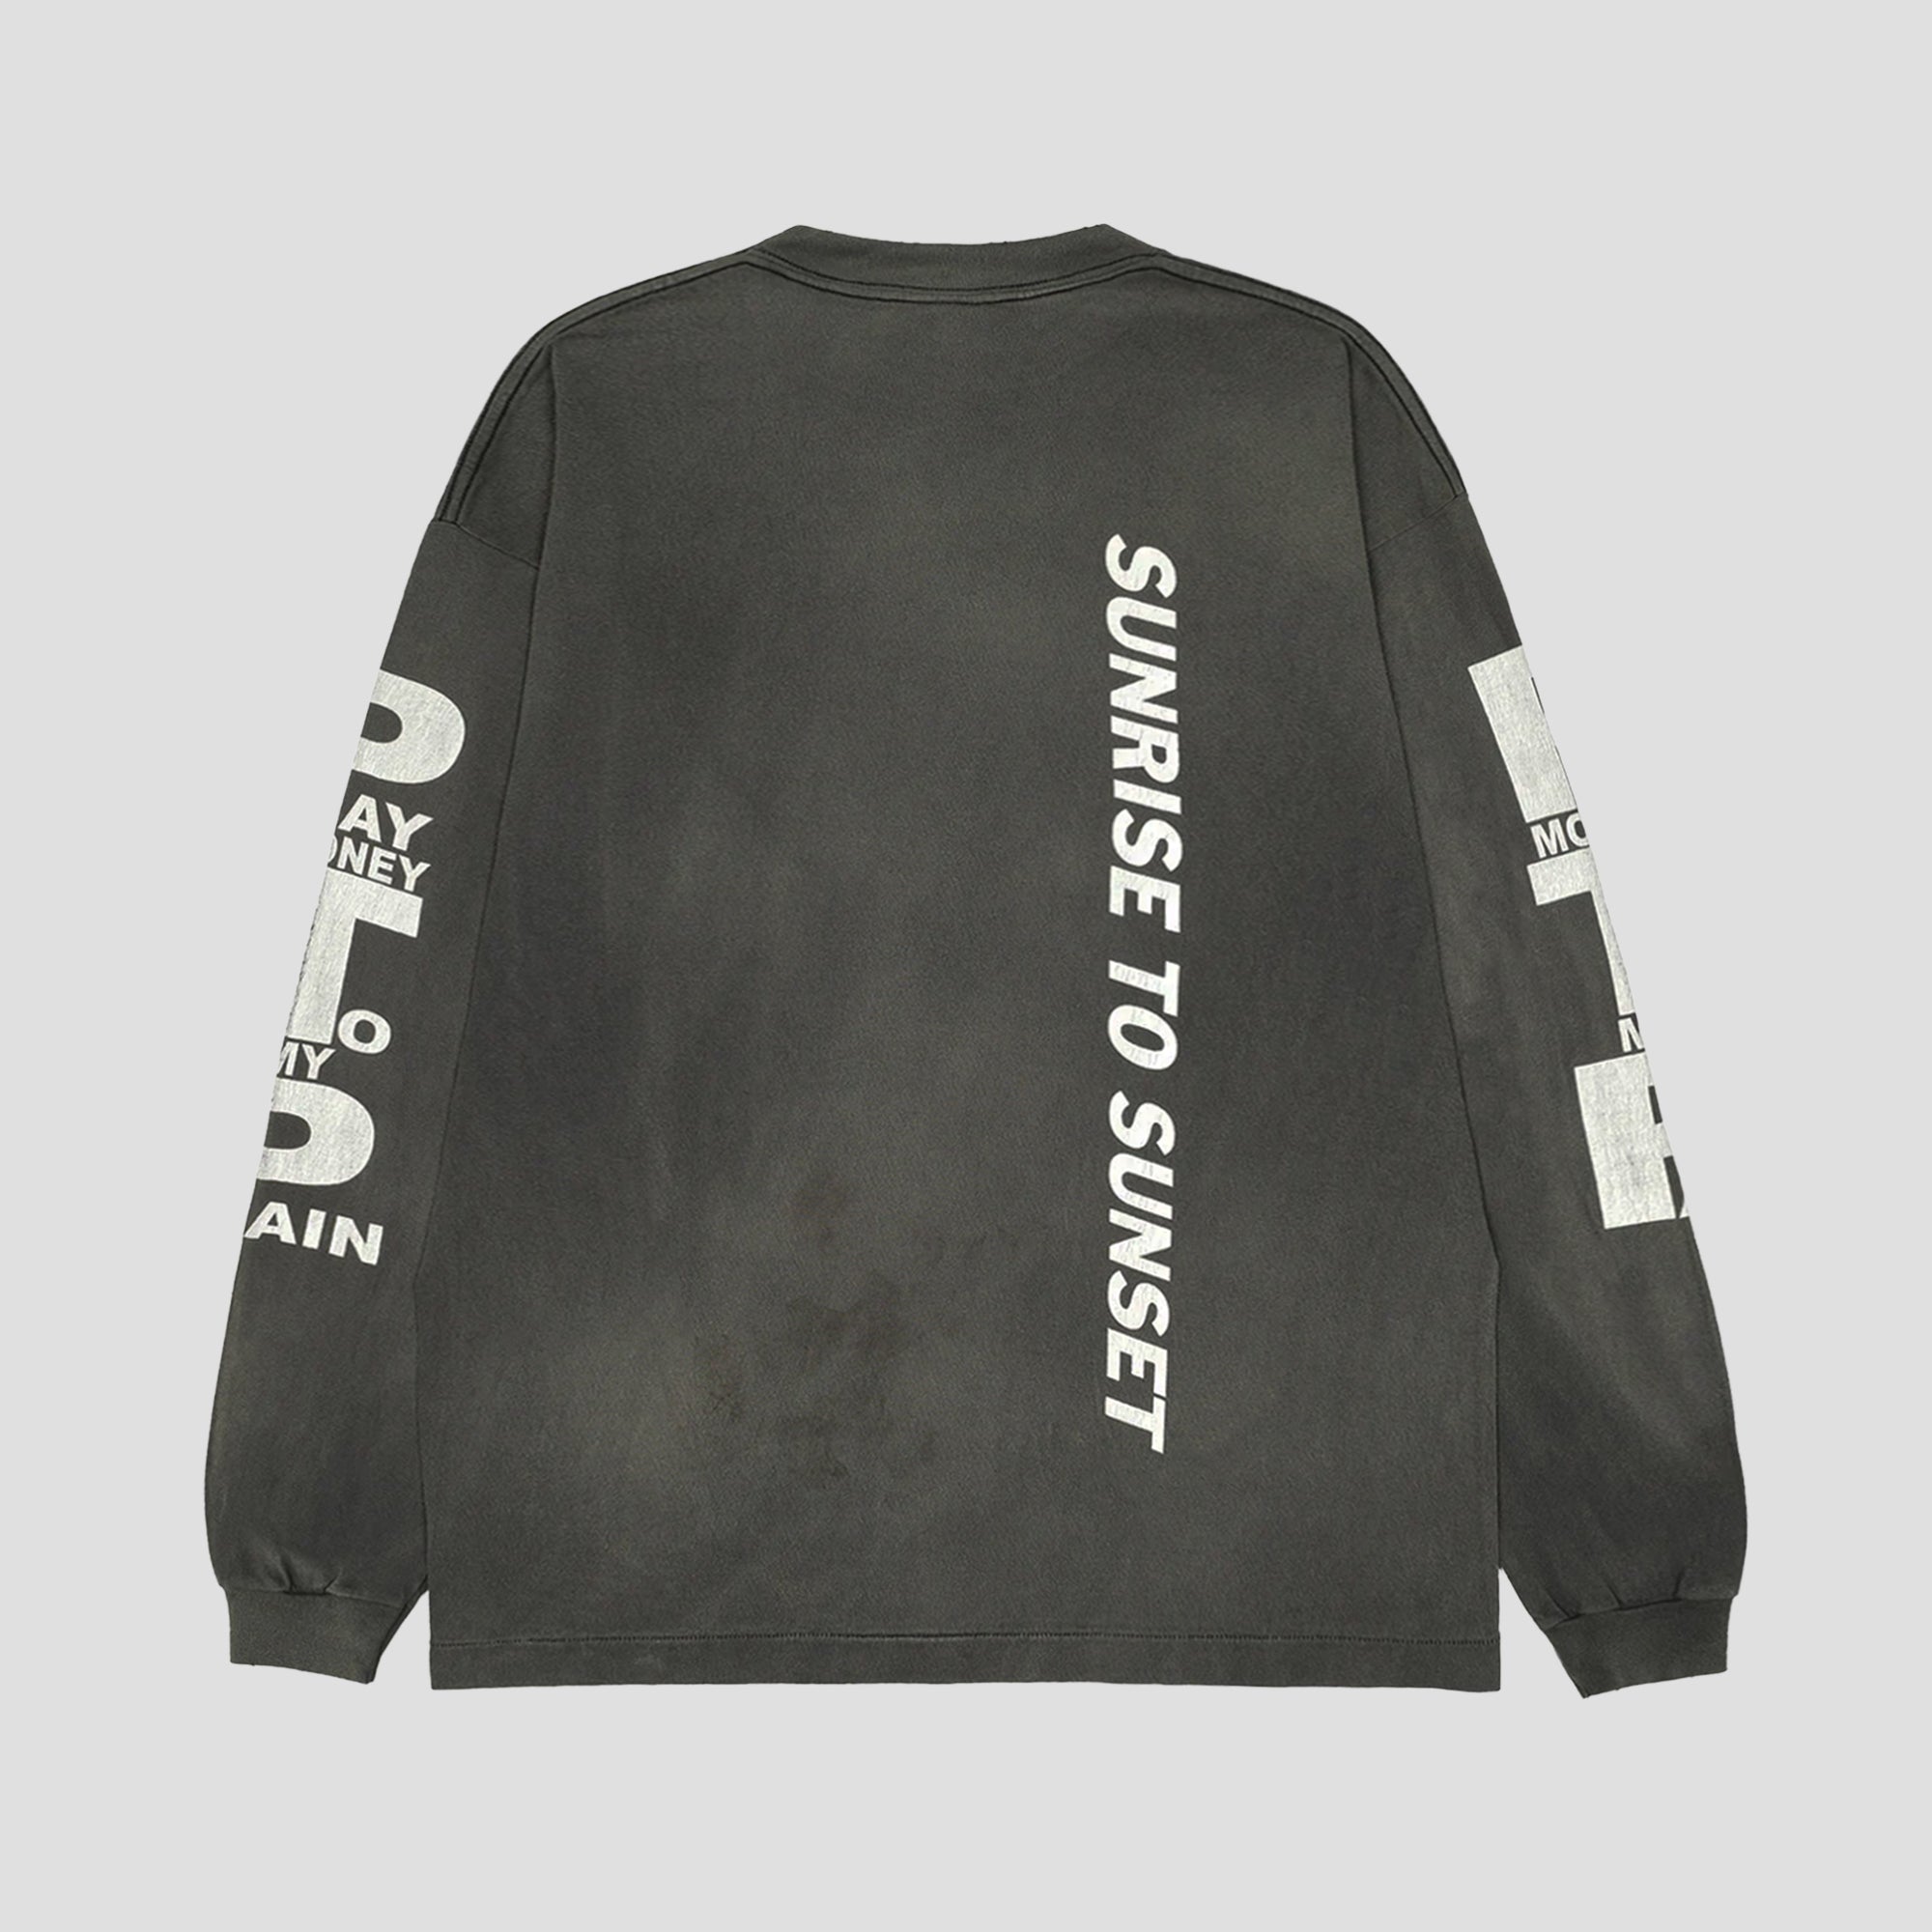 PAY MONEY TO MY PAIN L/S T-SHIRTS